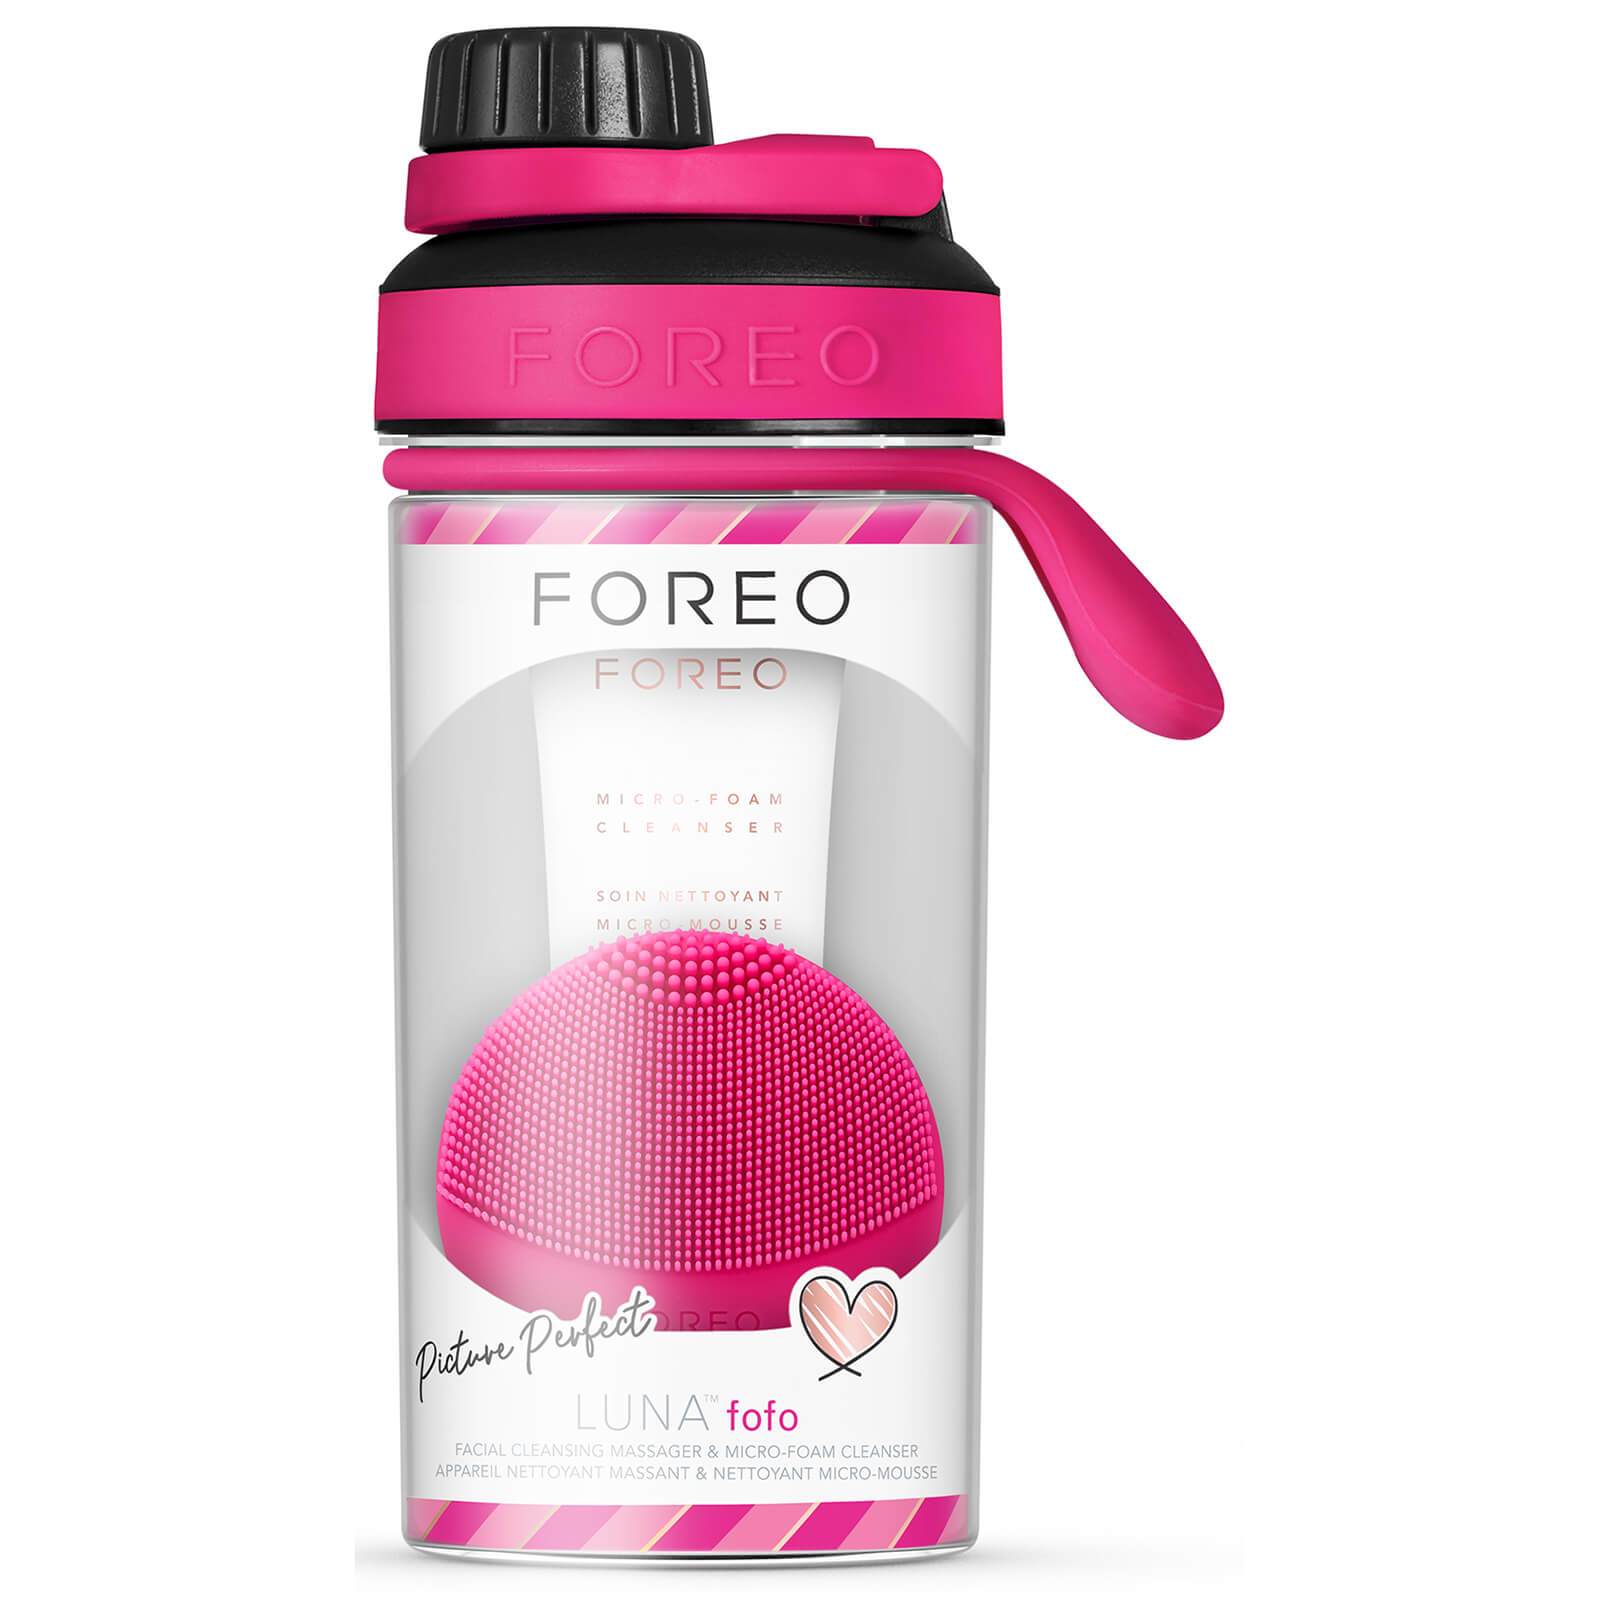 LUNA Set & Hair FOREO Picture Perfect Beauty Fofo | OZ